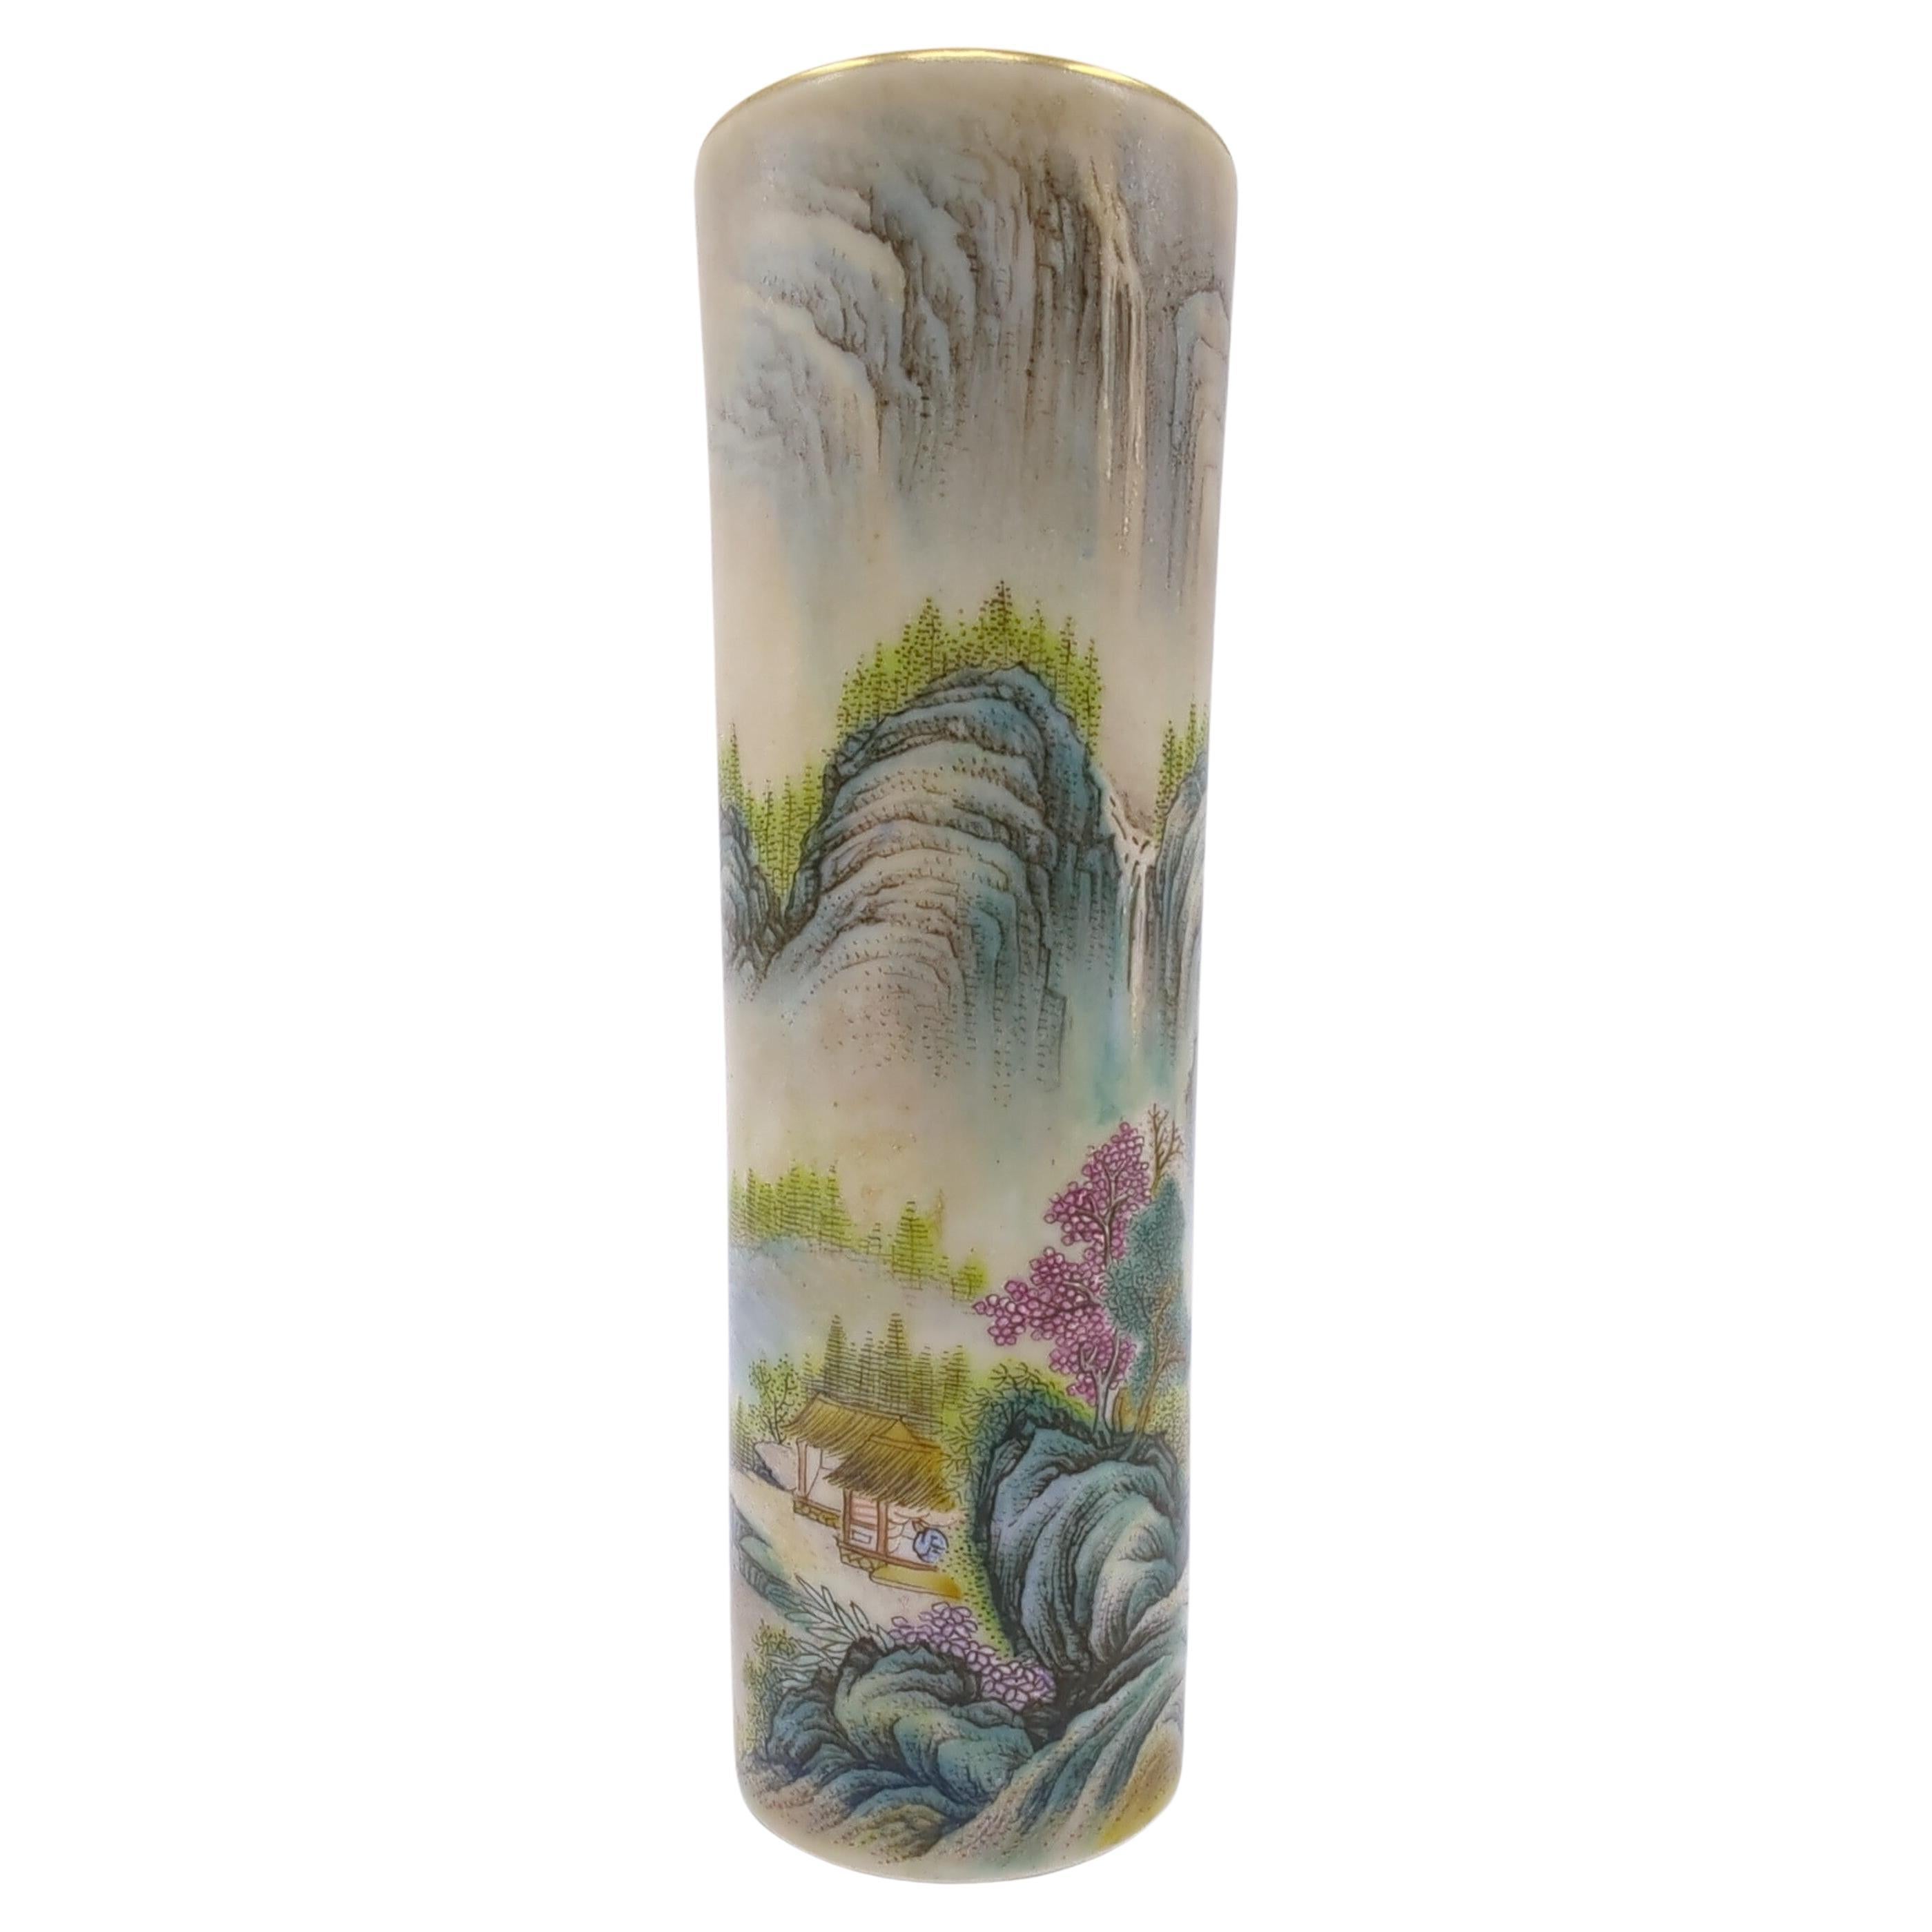 Qing Finest Chinese Famille Rose Fencai Shanshui Cylinder Vase Gilt Rim Early 20th C For Sale